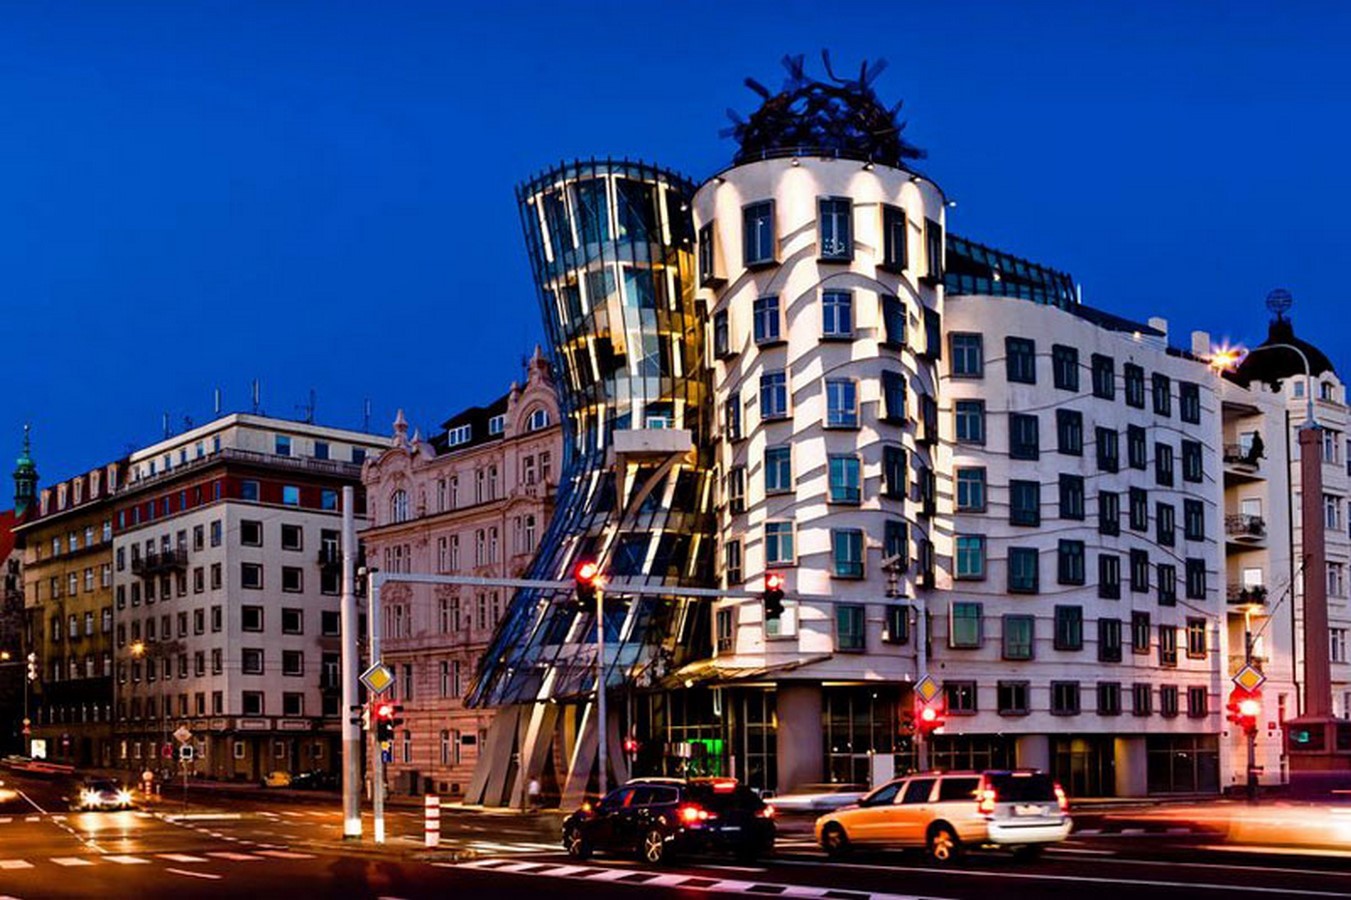 Famous buildings - The Dancing House by Frank Gehry and Vlado Milunic - Sheet1